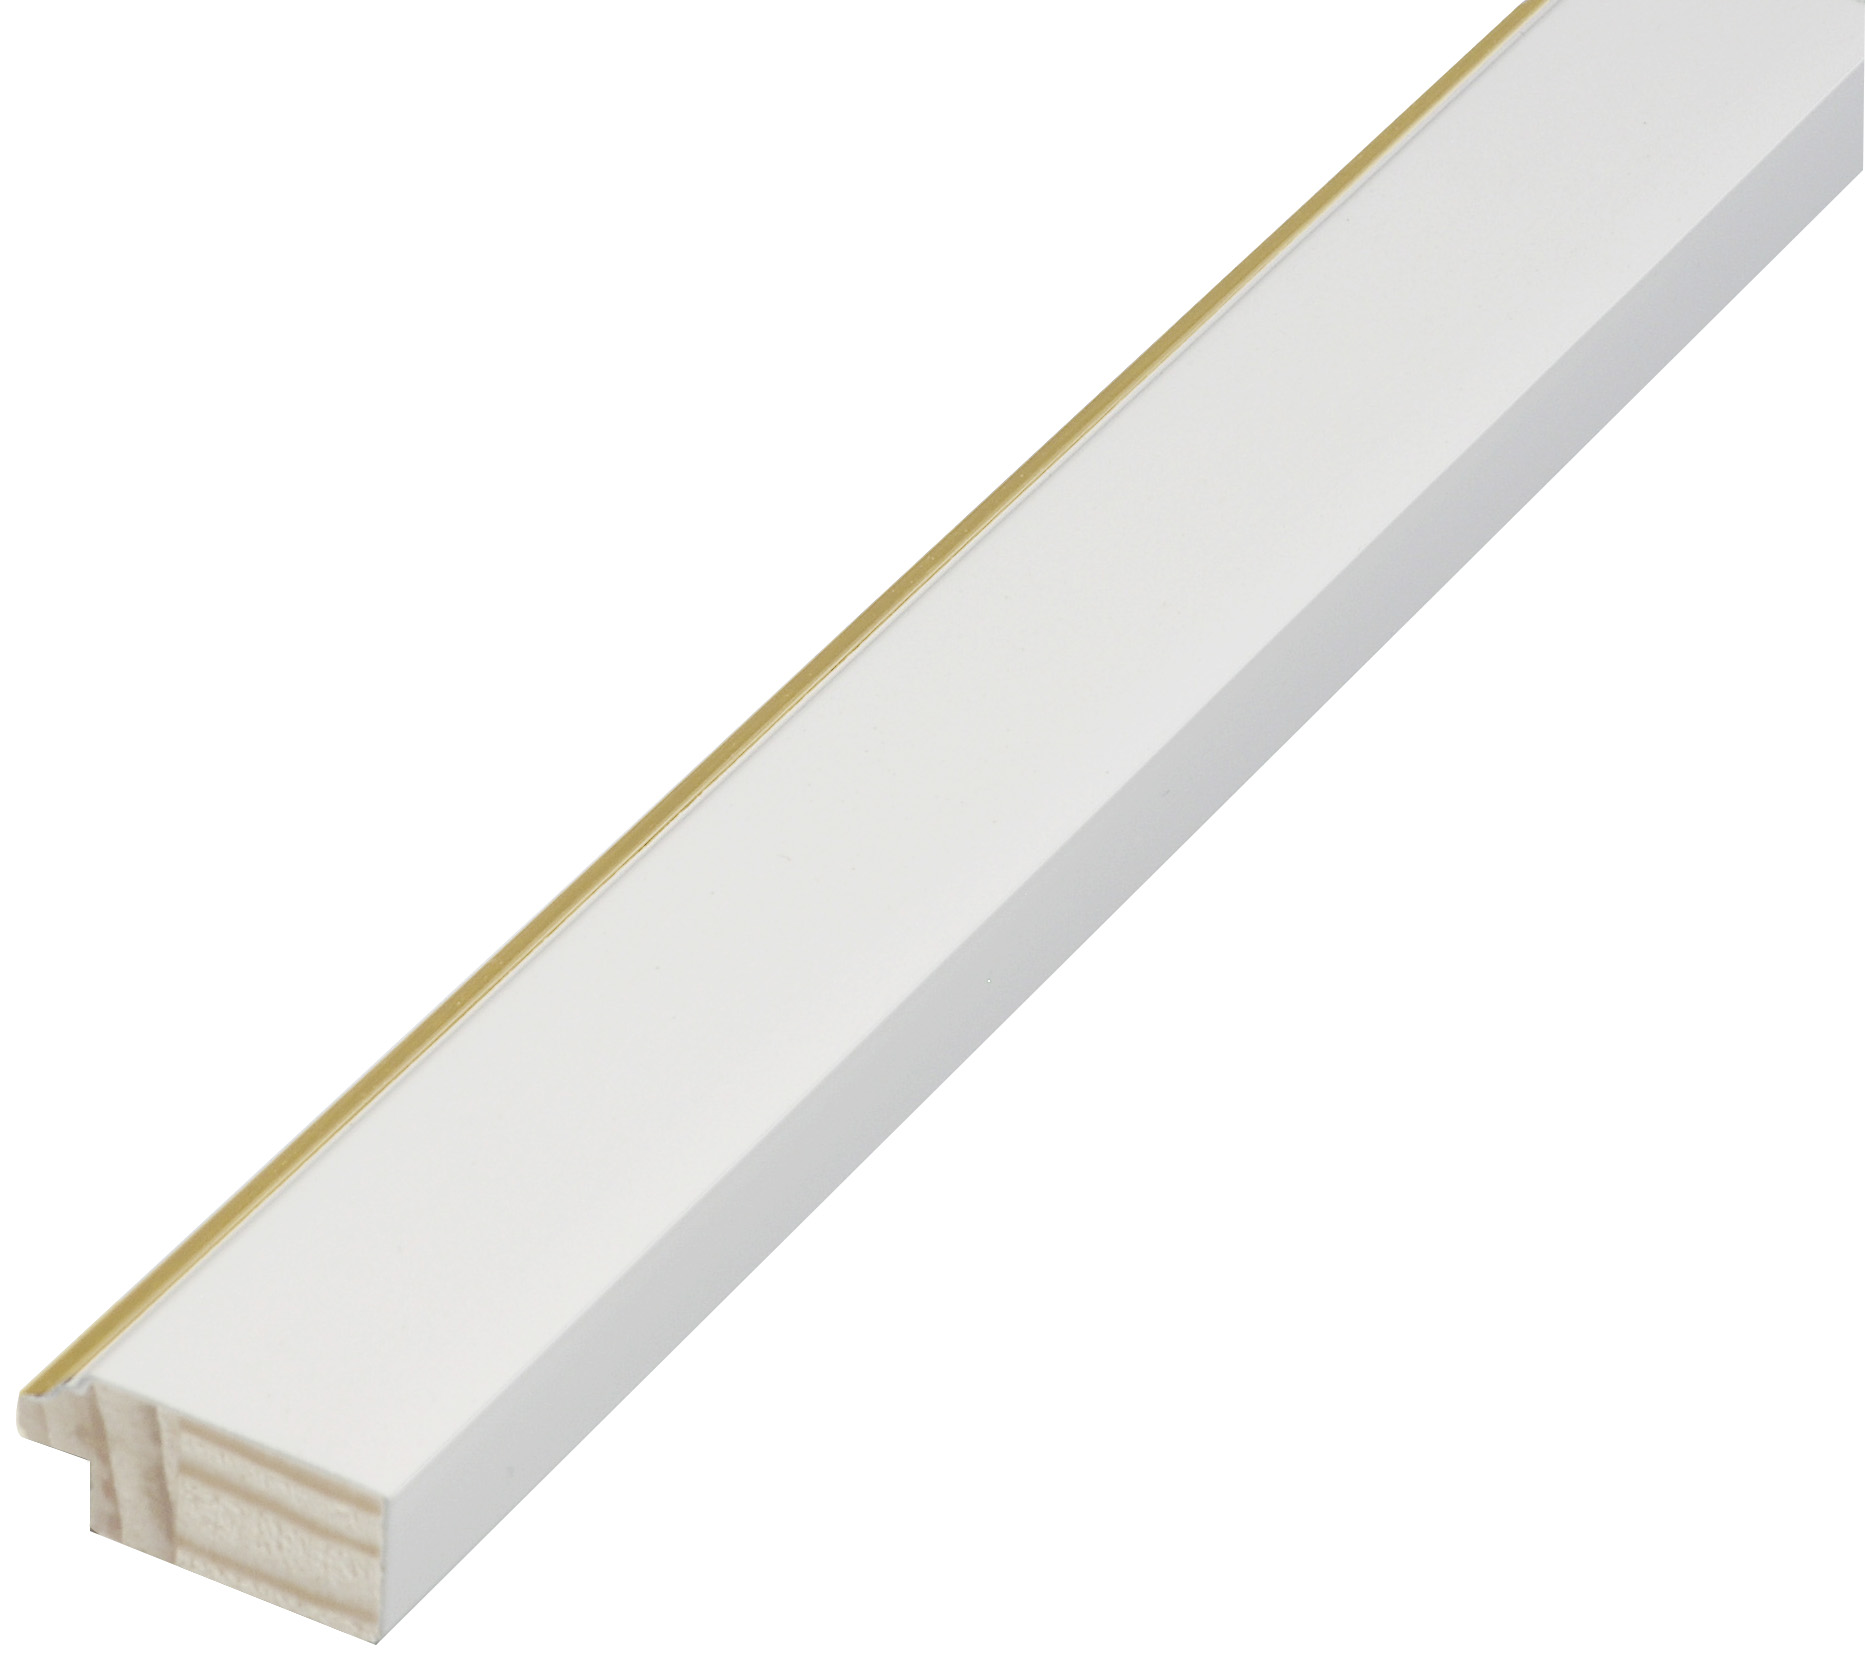 Liner ayous jointed 25mm - flat, white, gold edge